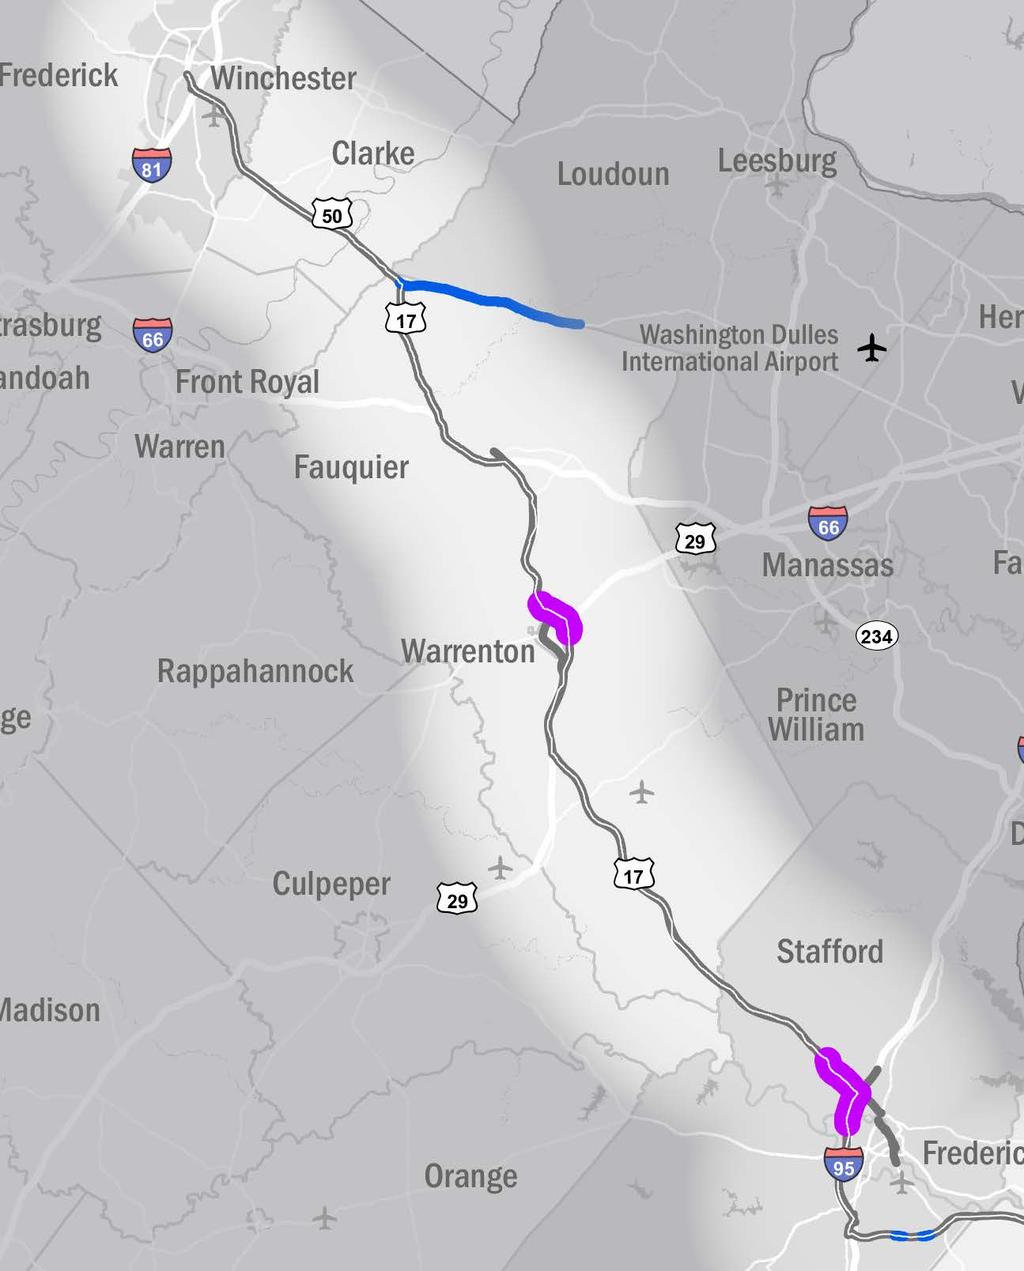 A3 SEGMENT PROFILE Segment A3 begins in Spotsylvania County, where US 17 joins I-95, and progresses north, leaving I-95 north of Fredericksburg, and serves Stafford, Fauquier, Clarke and Frederick